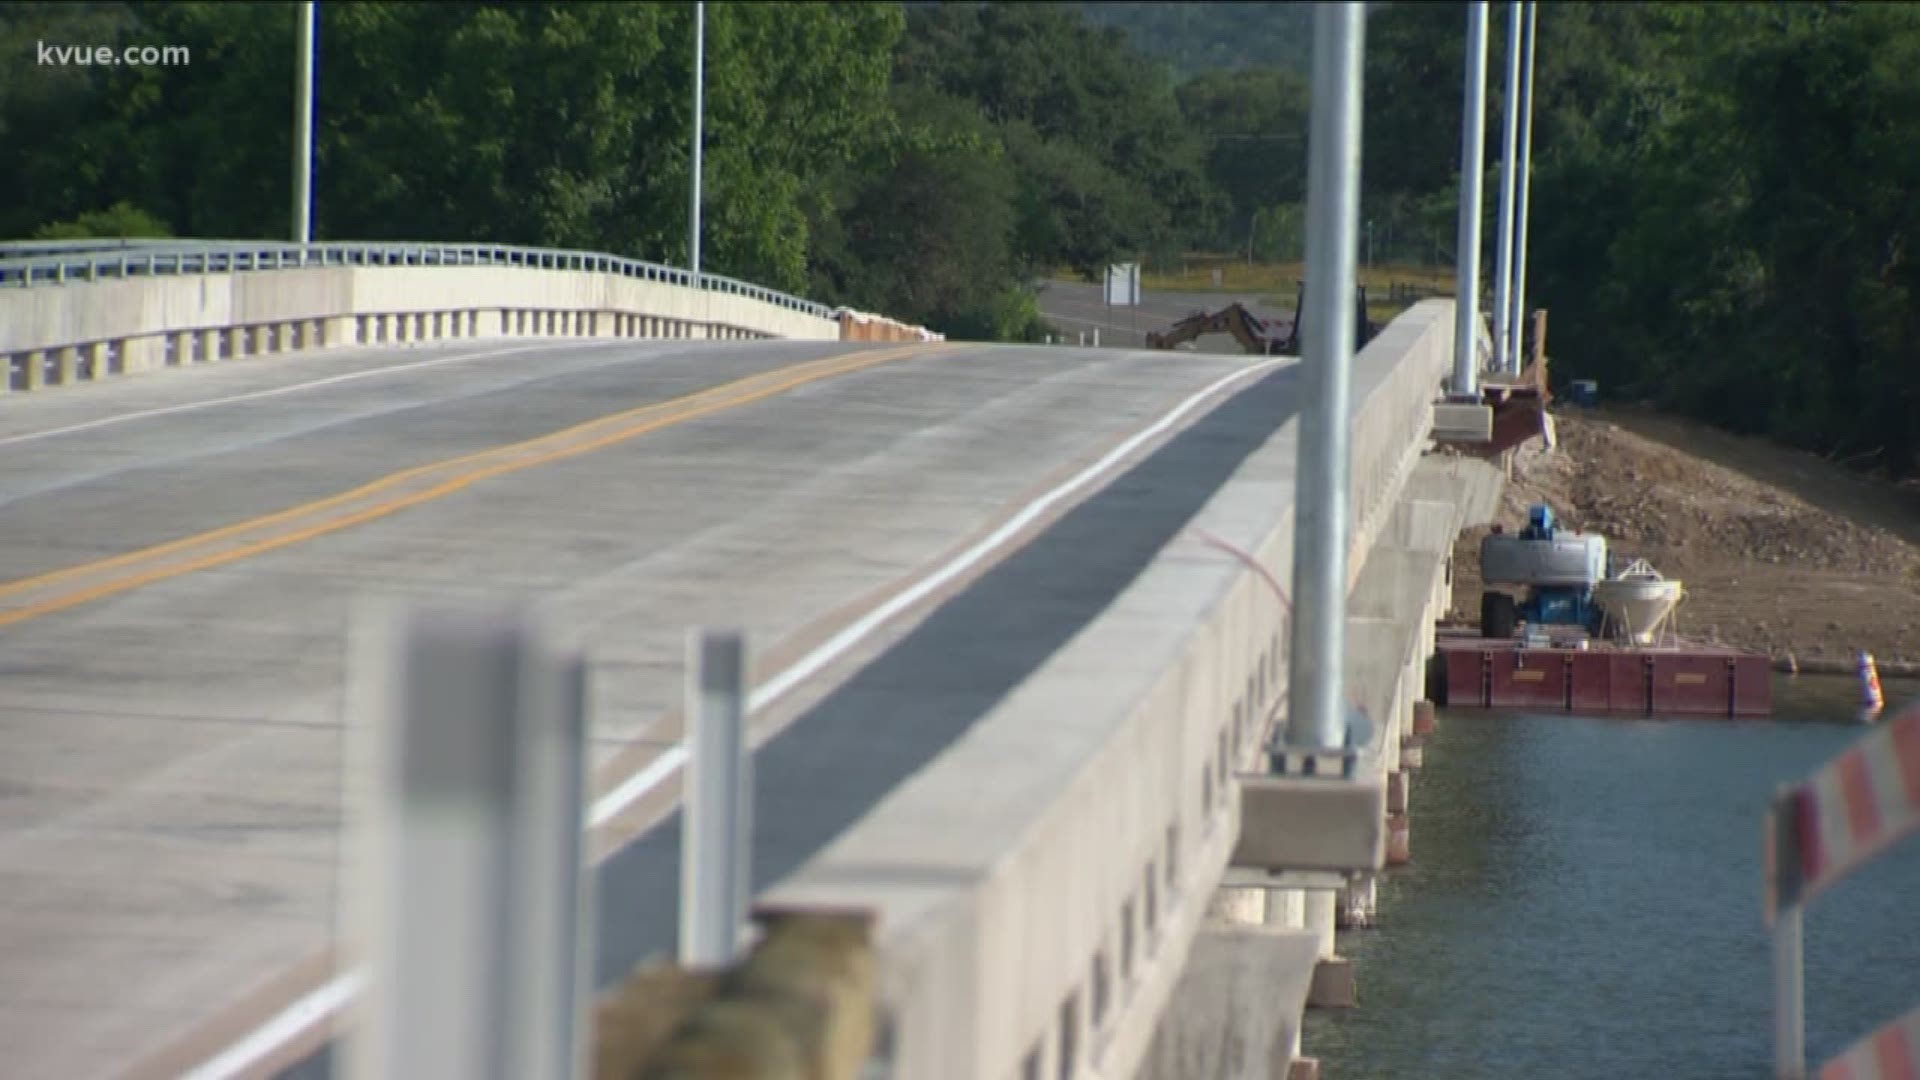 It's been seven months since floodwaters washed through Central Texas, taking the RM 2900 bridge in Kingsland with them.